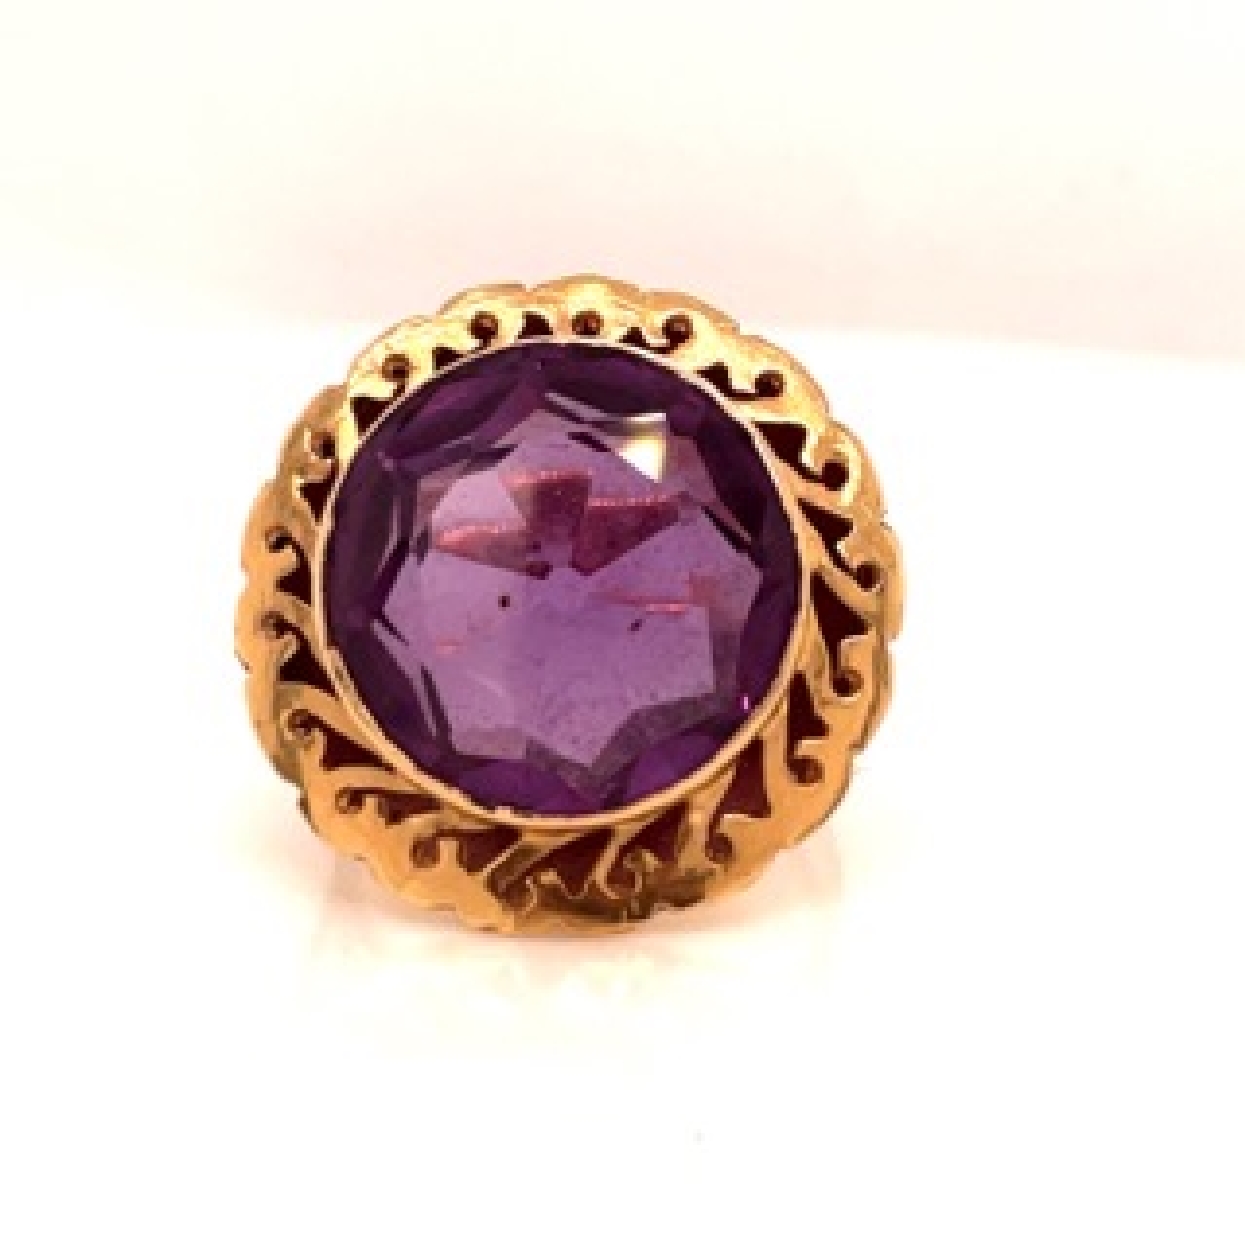 14K  Yellow Gold European Cut Synthetic Sapphire Ring 

Size: 7.75
Width of Center: 24mm
Width of Shank: 3mm